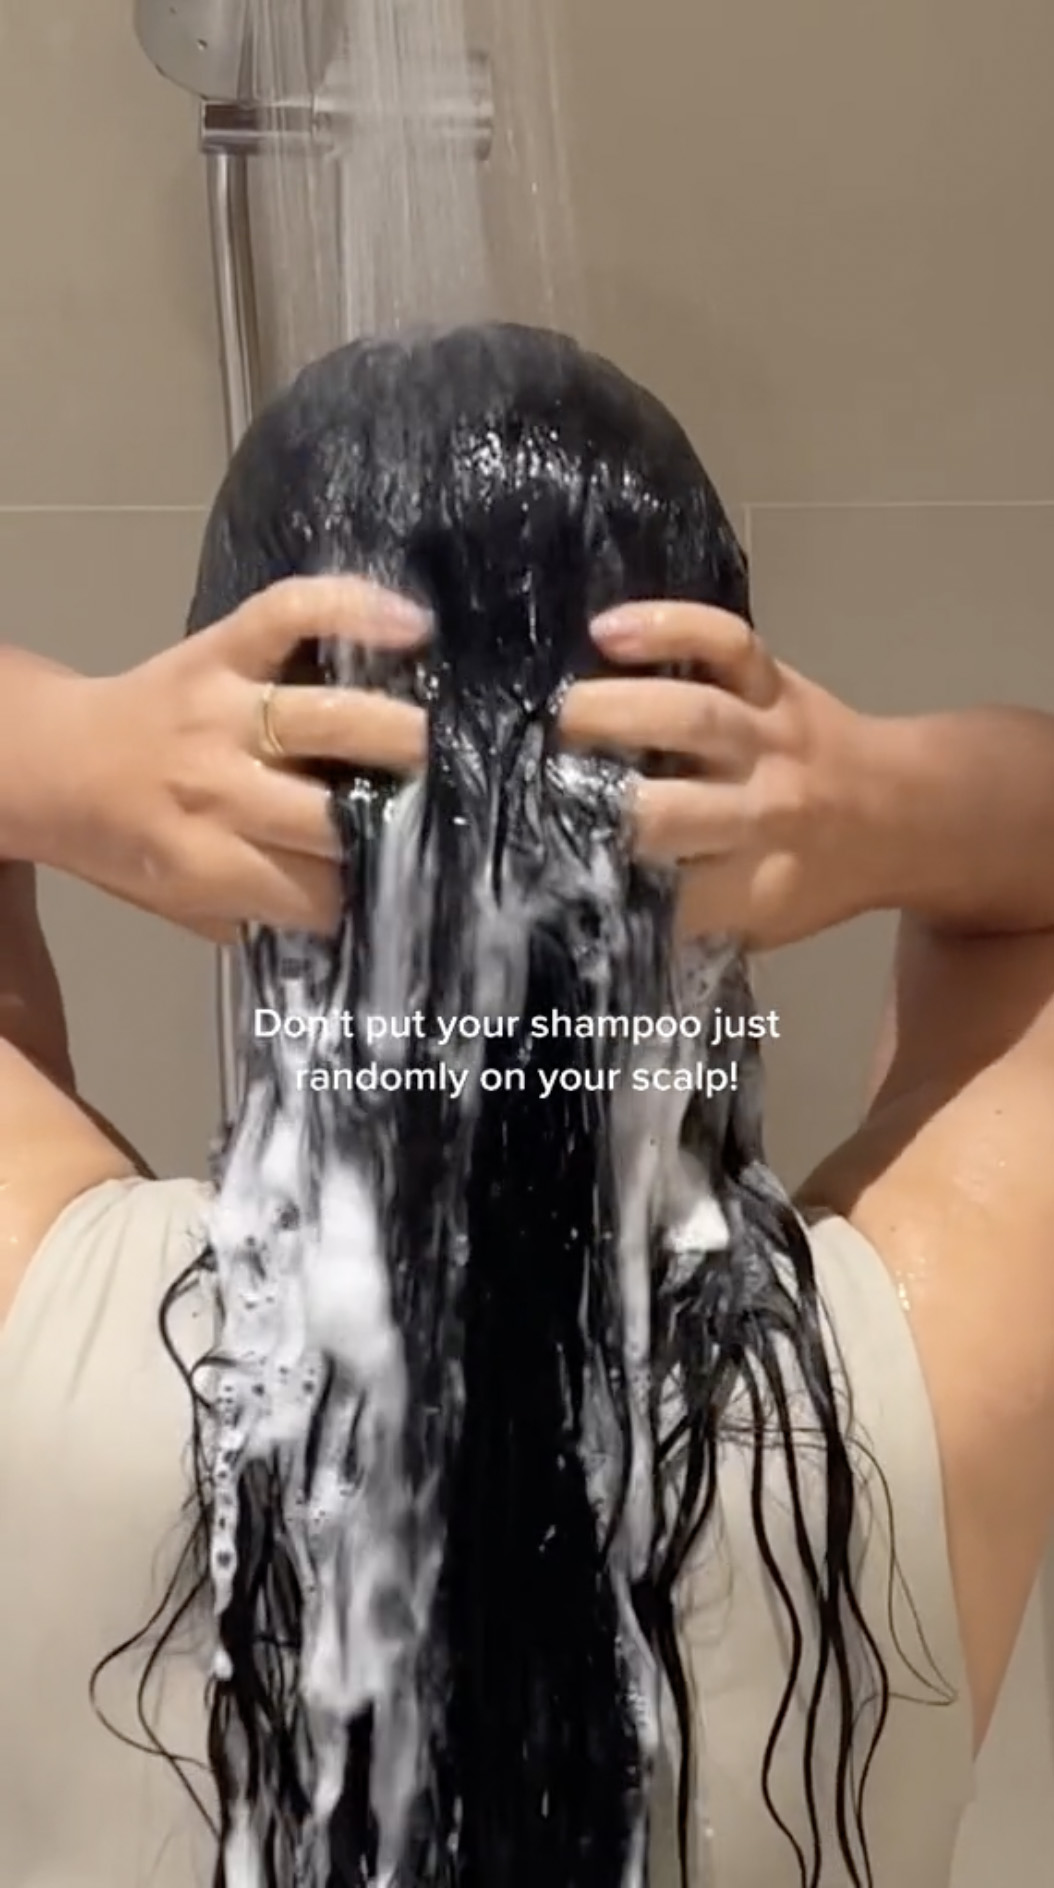 You’re shampooing your hair wrong – the key to spreading it evenly and cleansing your scalp better